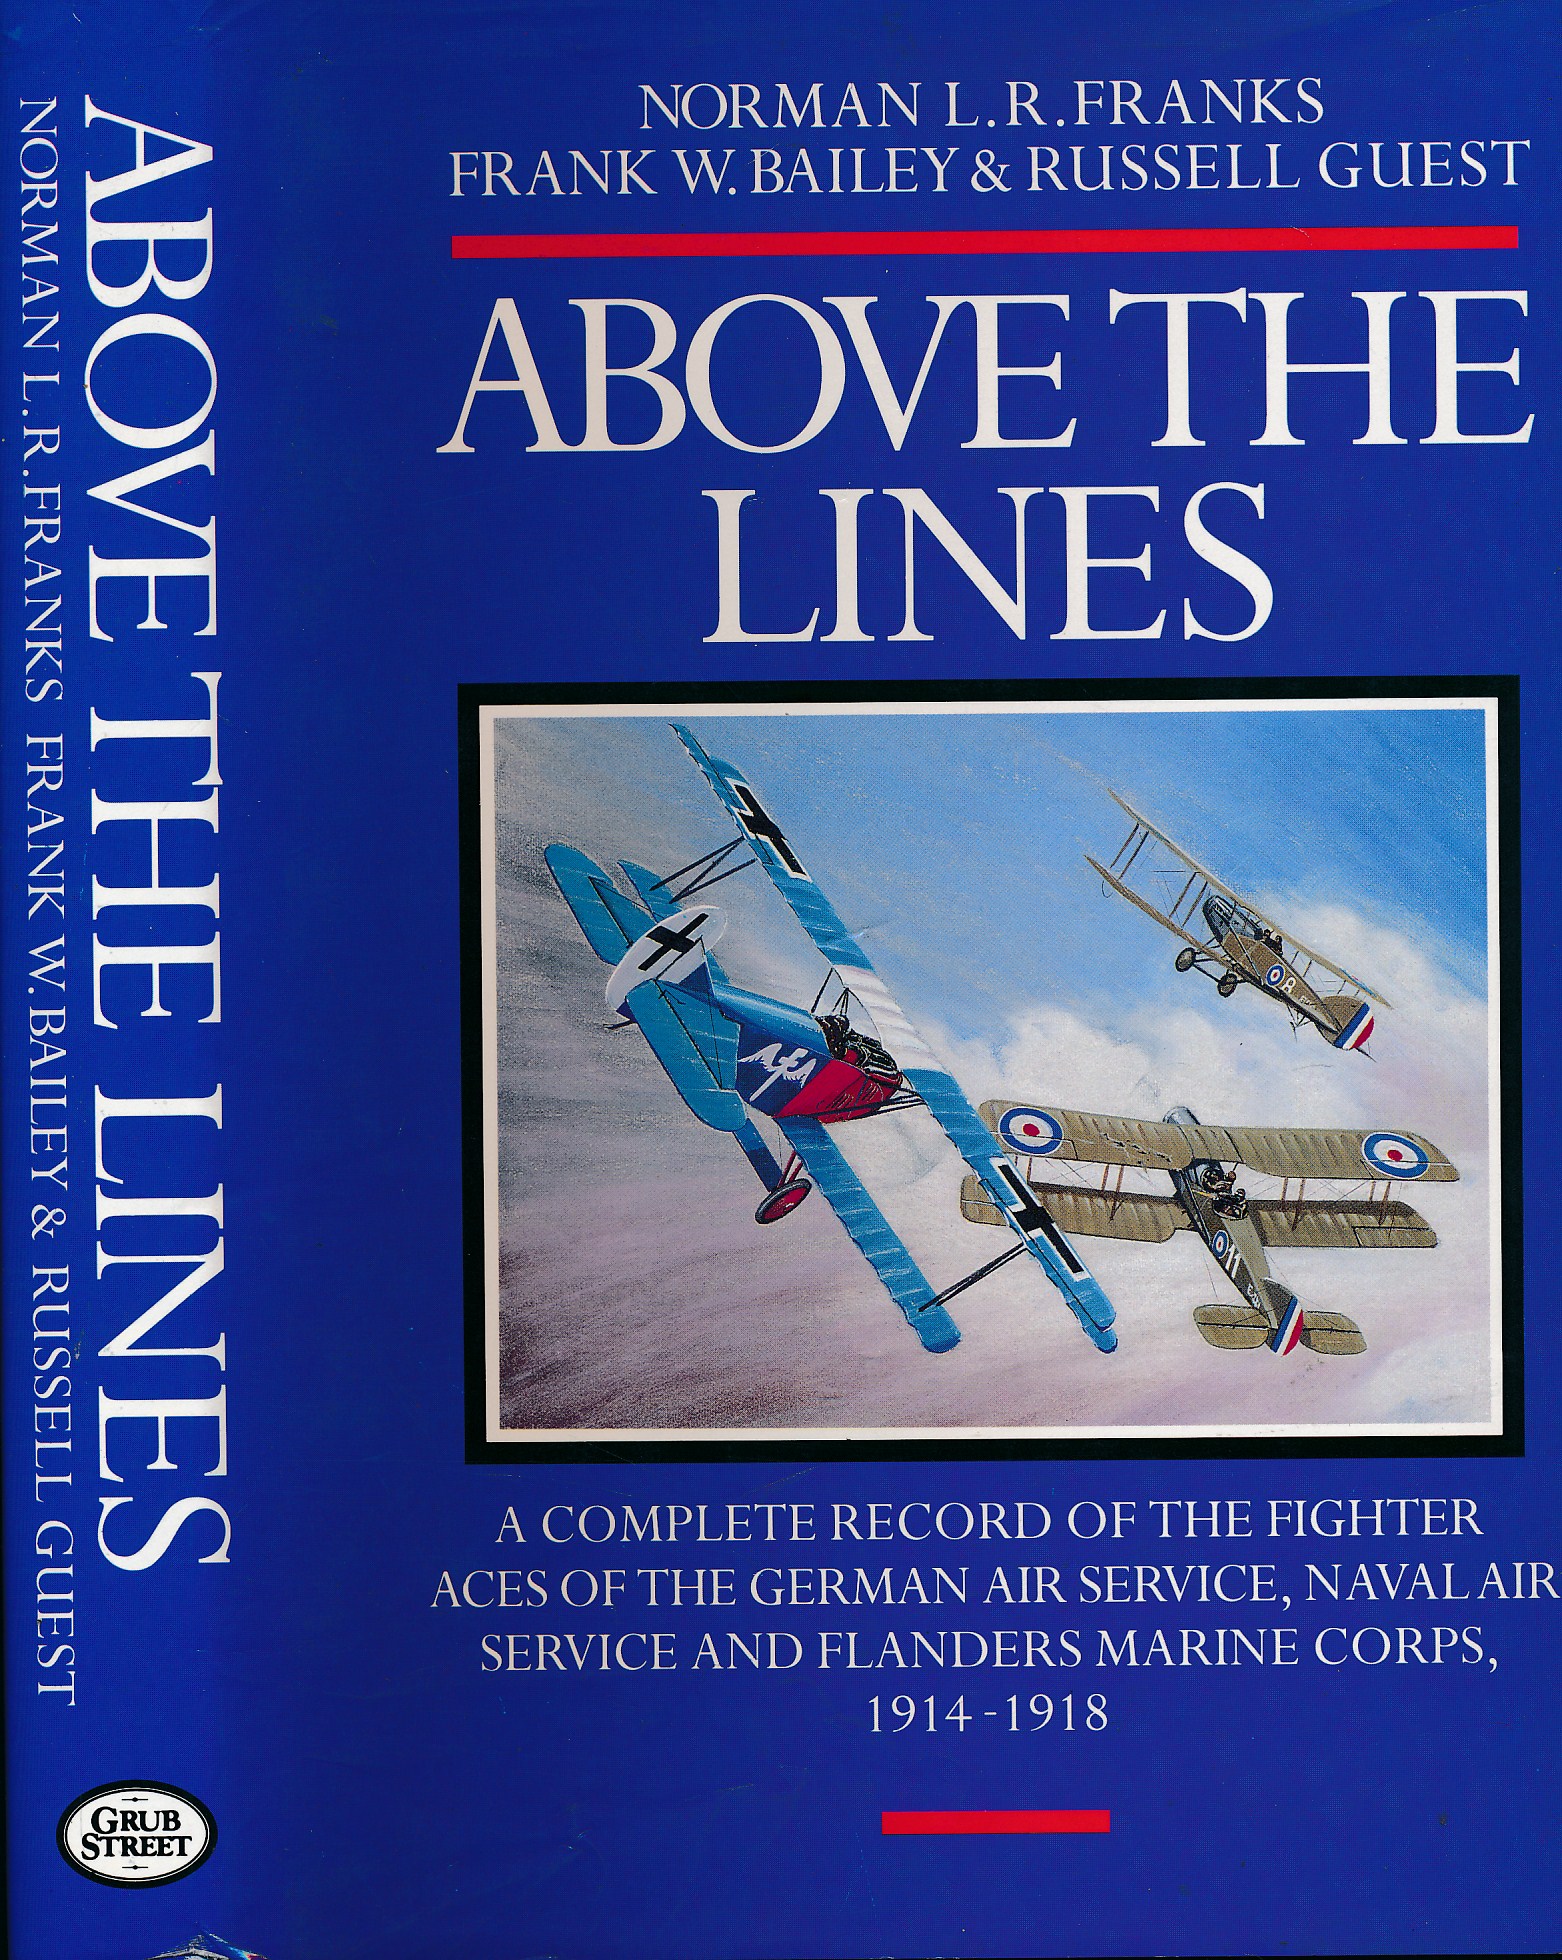 Above the Lines. The Aces and Fighter Units of the German Air Service, Naval Air Service and Flanders Marine Corps 1914-1918